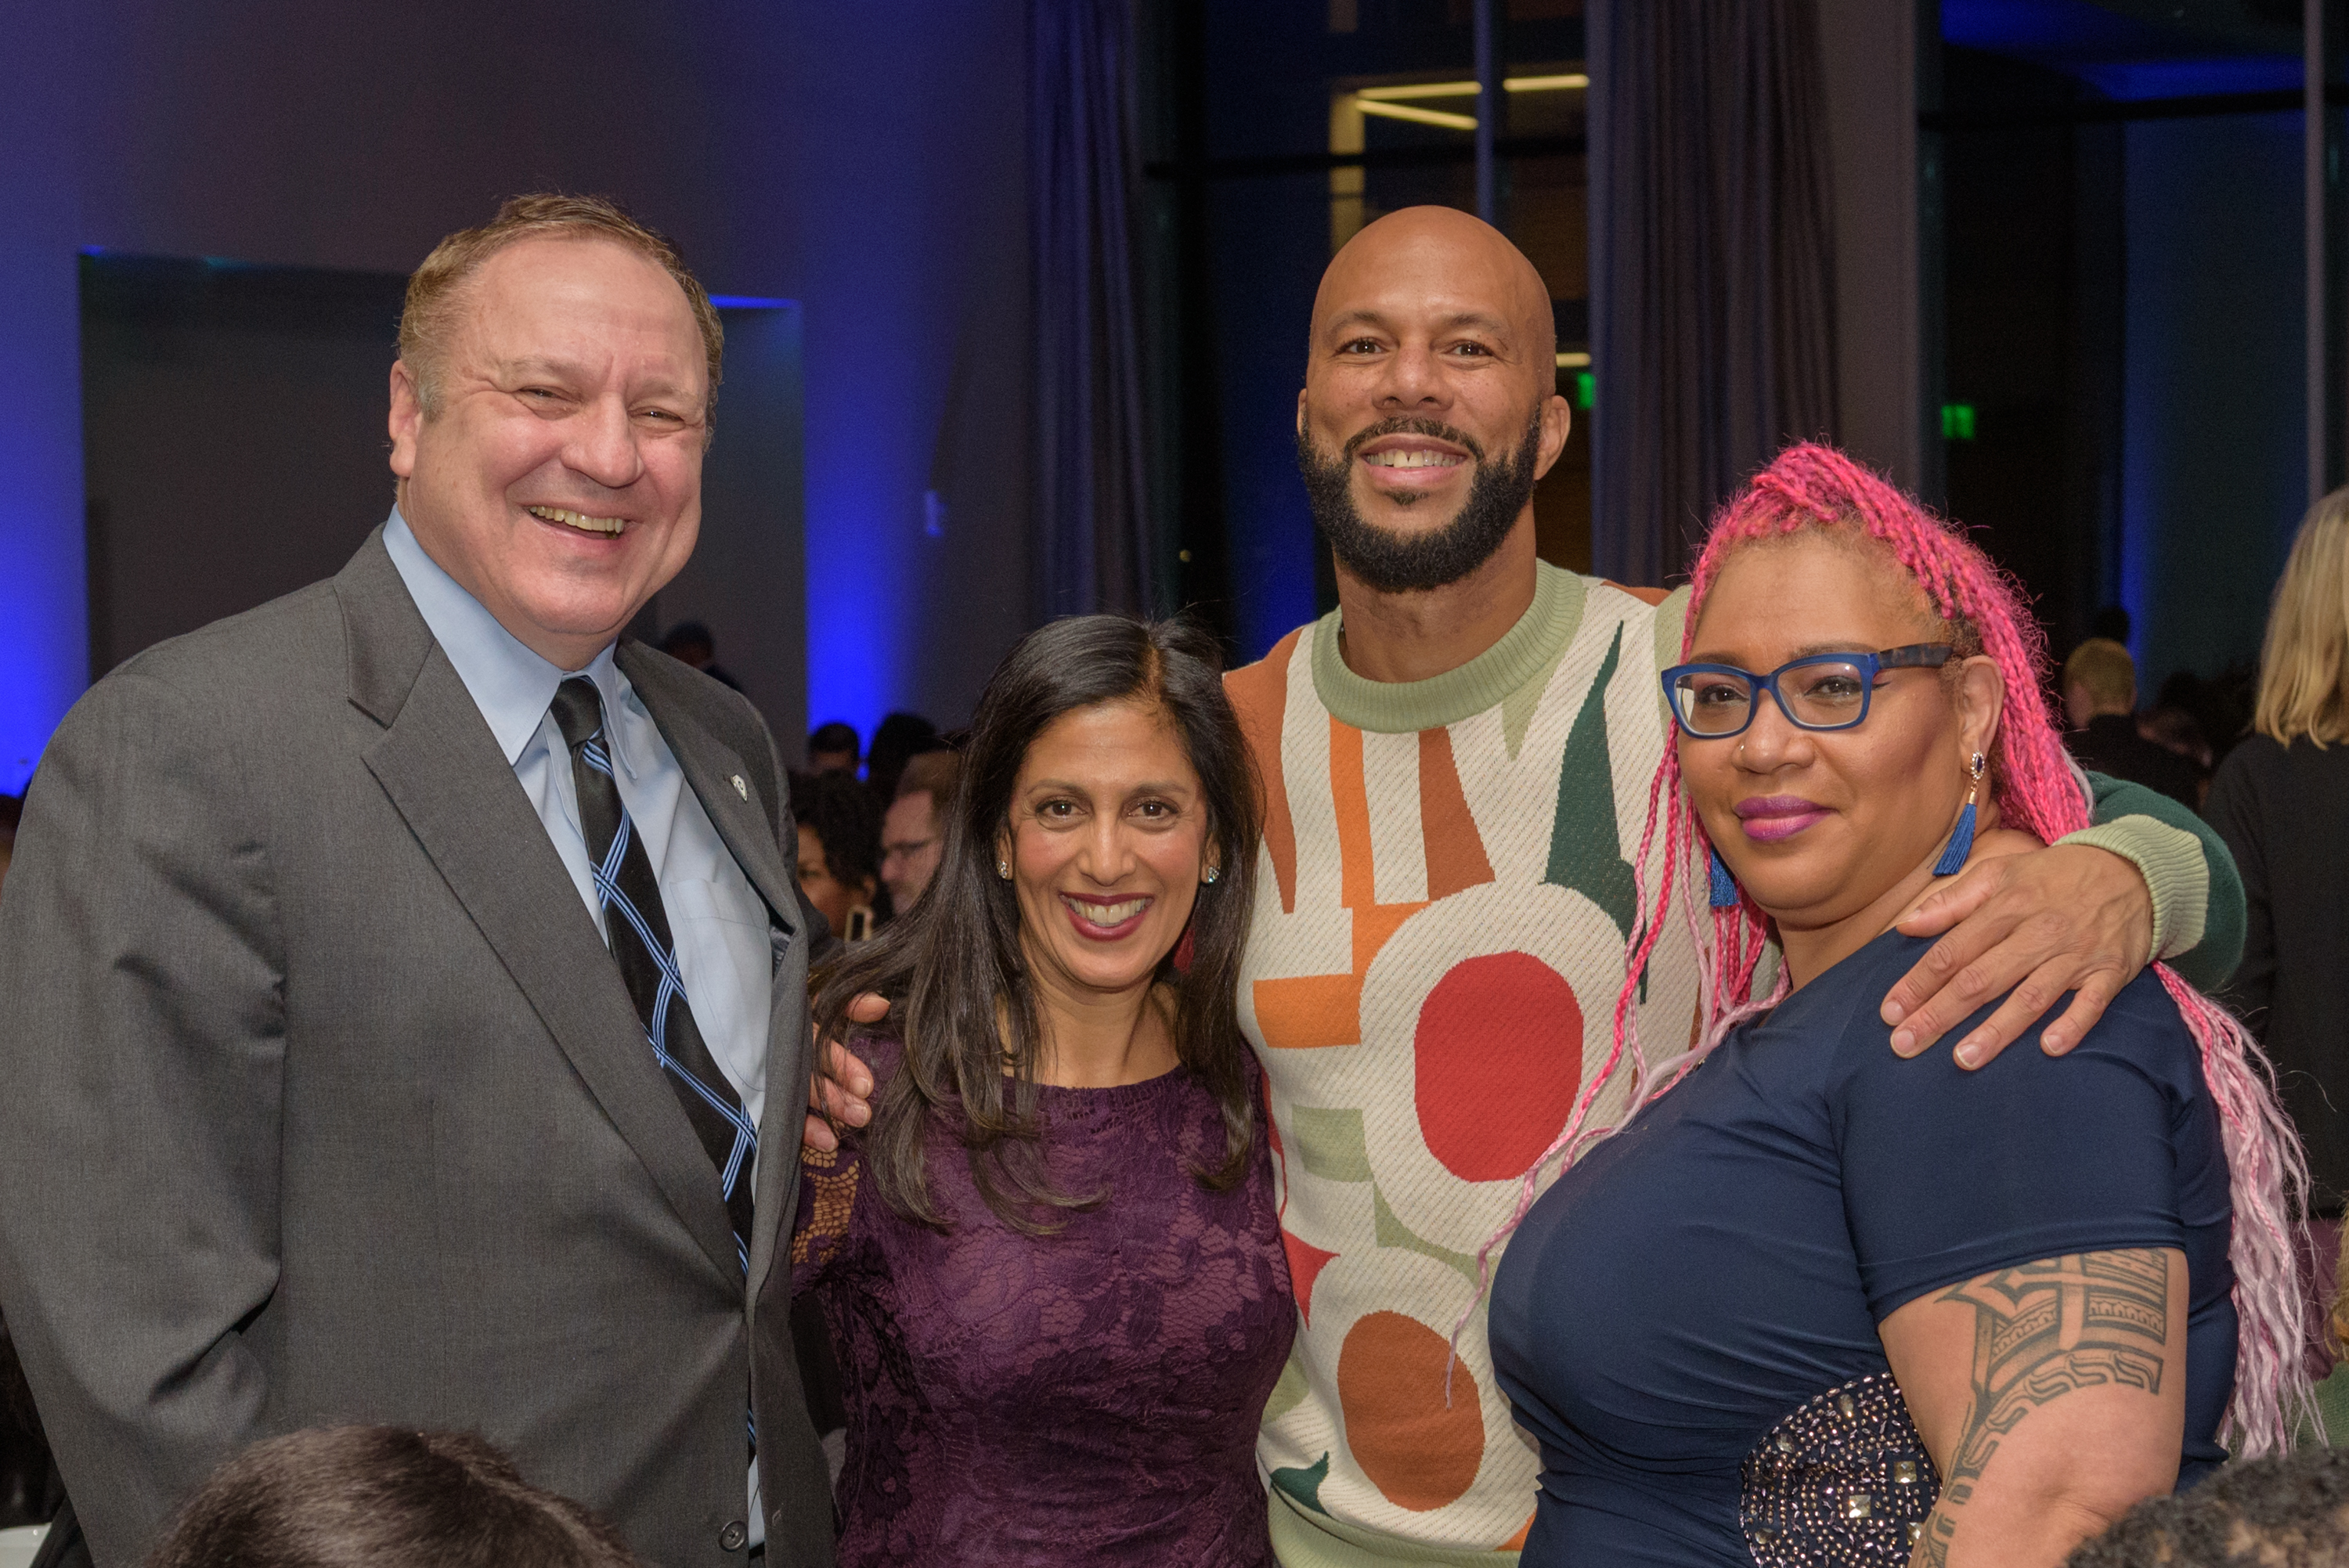 Concordia University’s 9th annual Atiyeh Awards gala event that honors leaders in education and raises money for student scholarships.
Interim President Tom Ries, Honoree Swati Adarkar, Children’s Institute, Keynote Speaker Common, and Emcee Kimberely Dixon